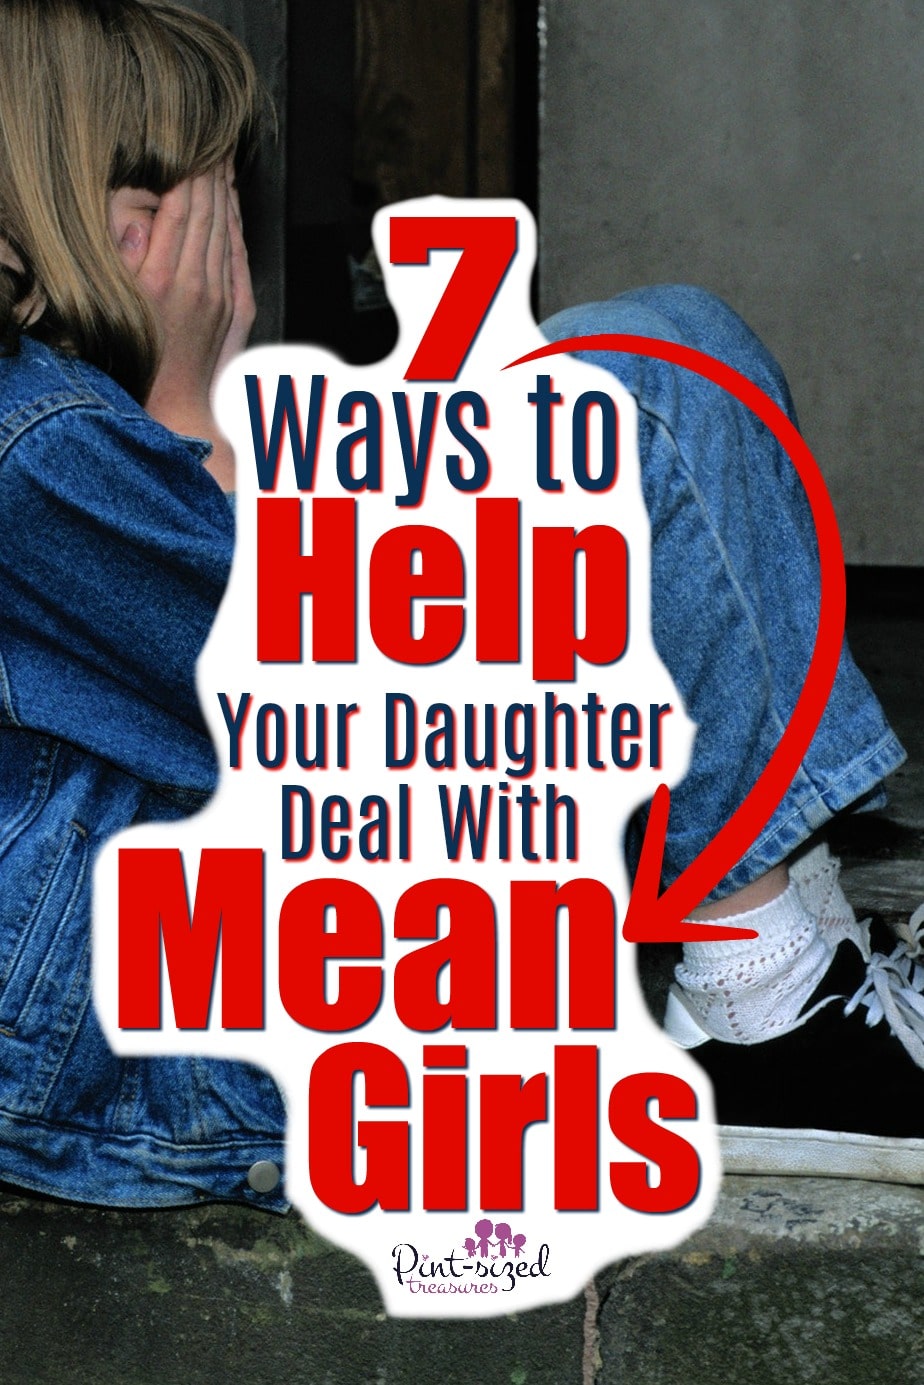 How to help your daughter deal with mean girls